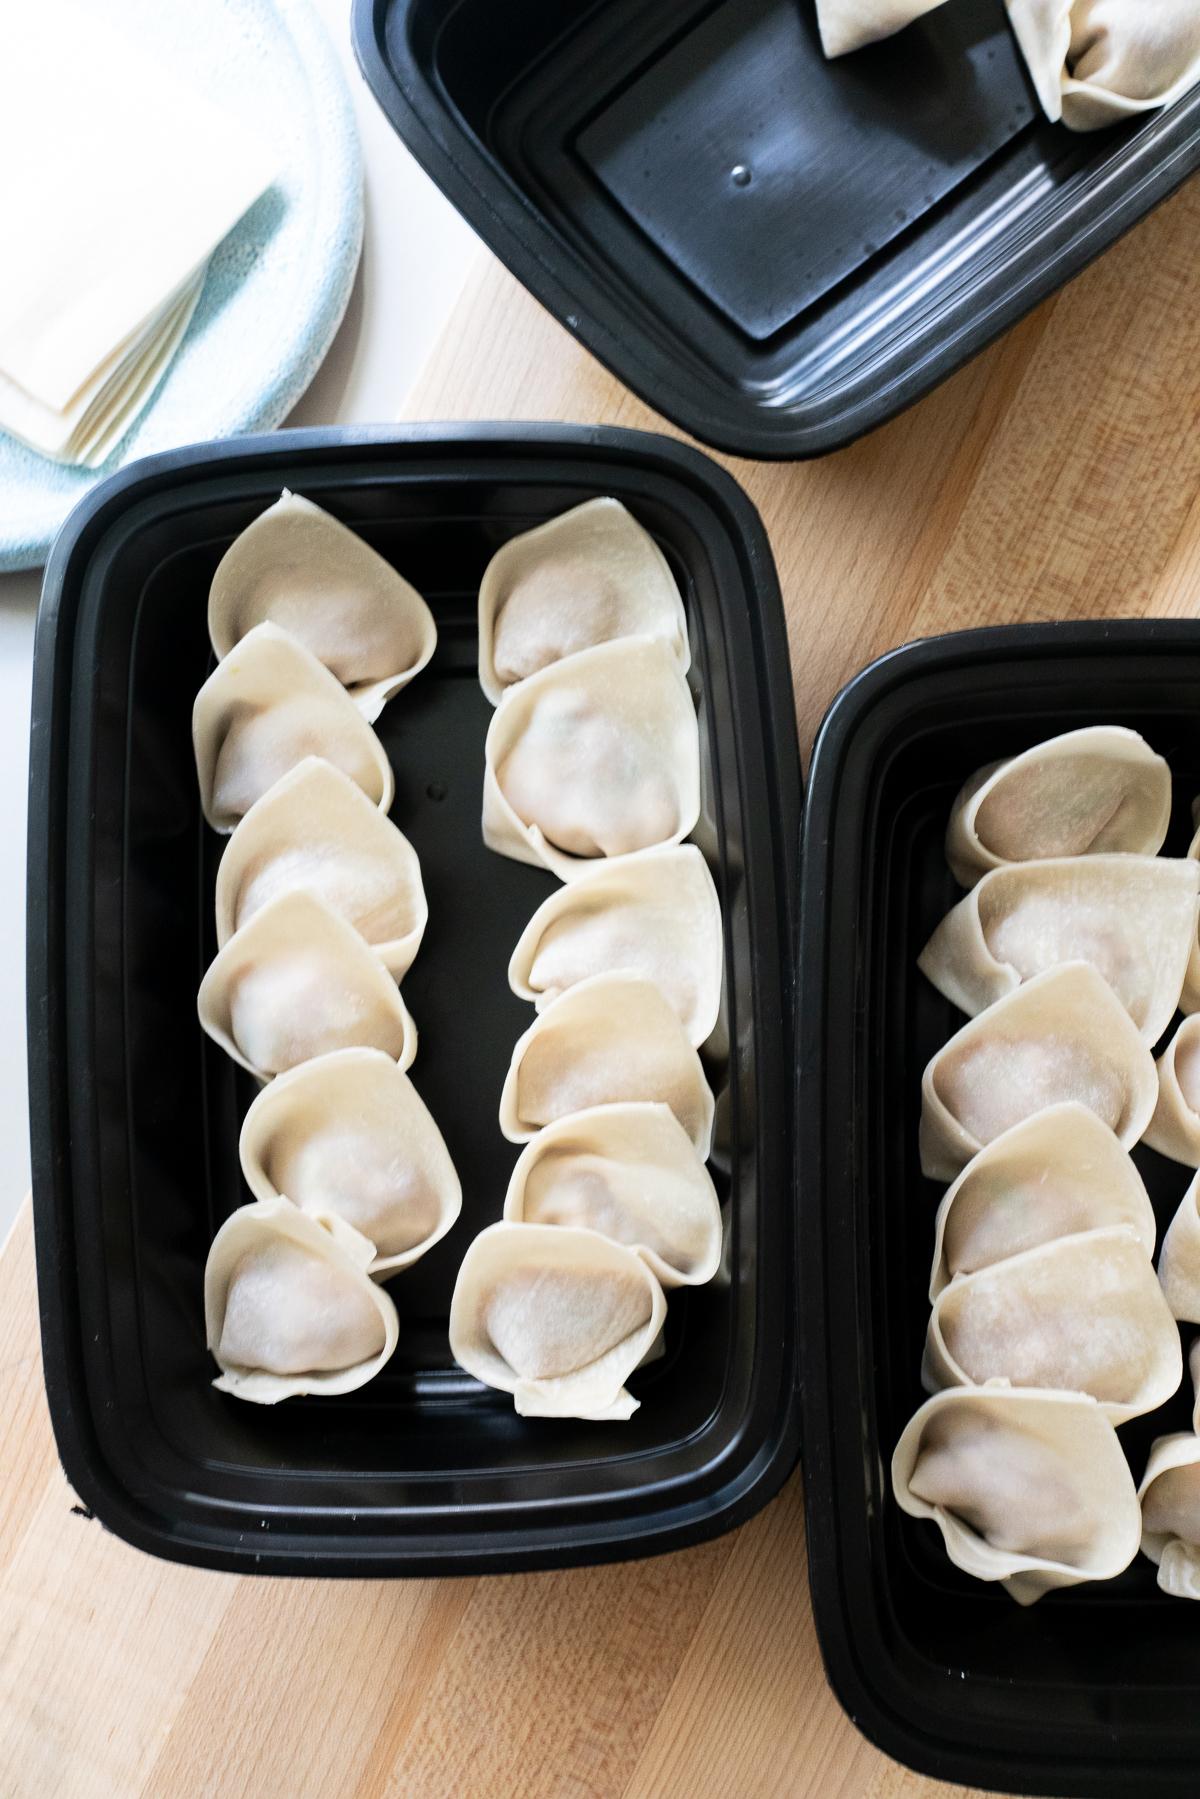 Wrapped wontons in containers